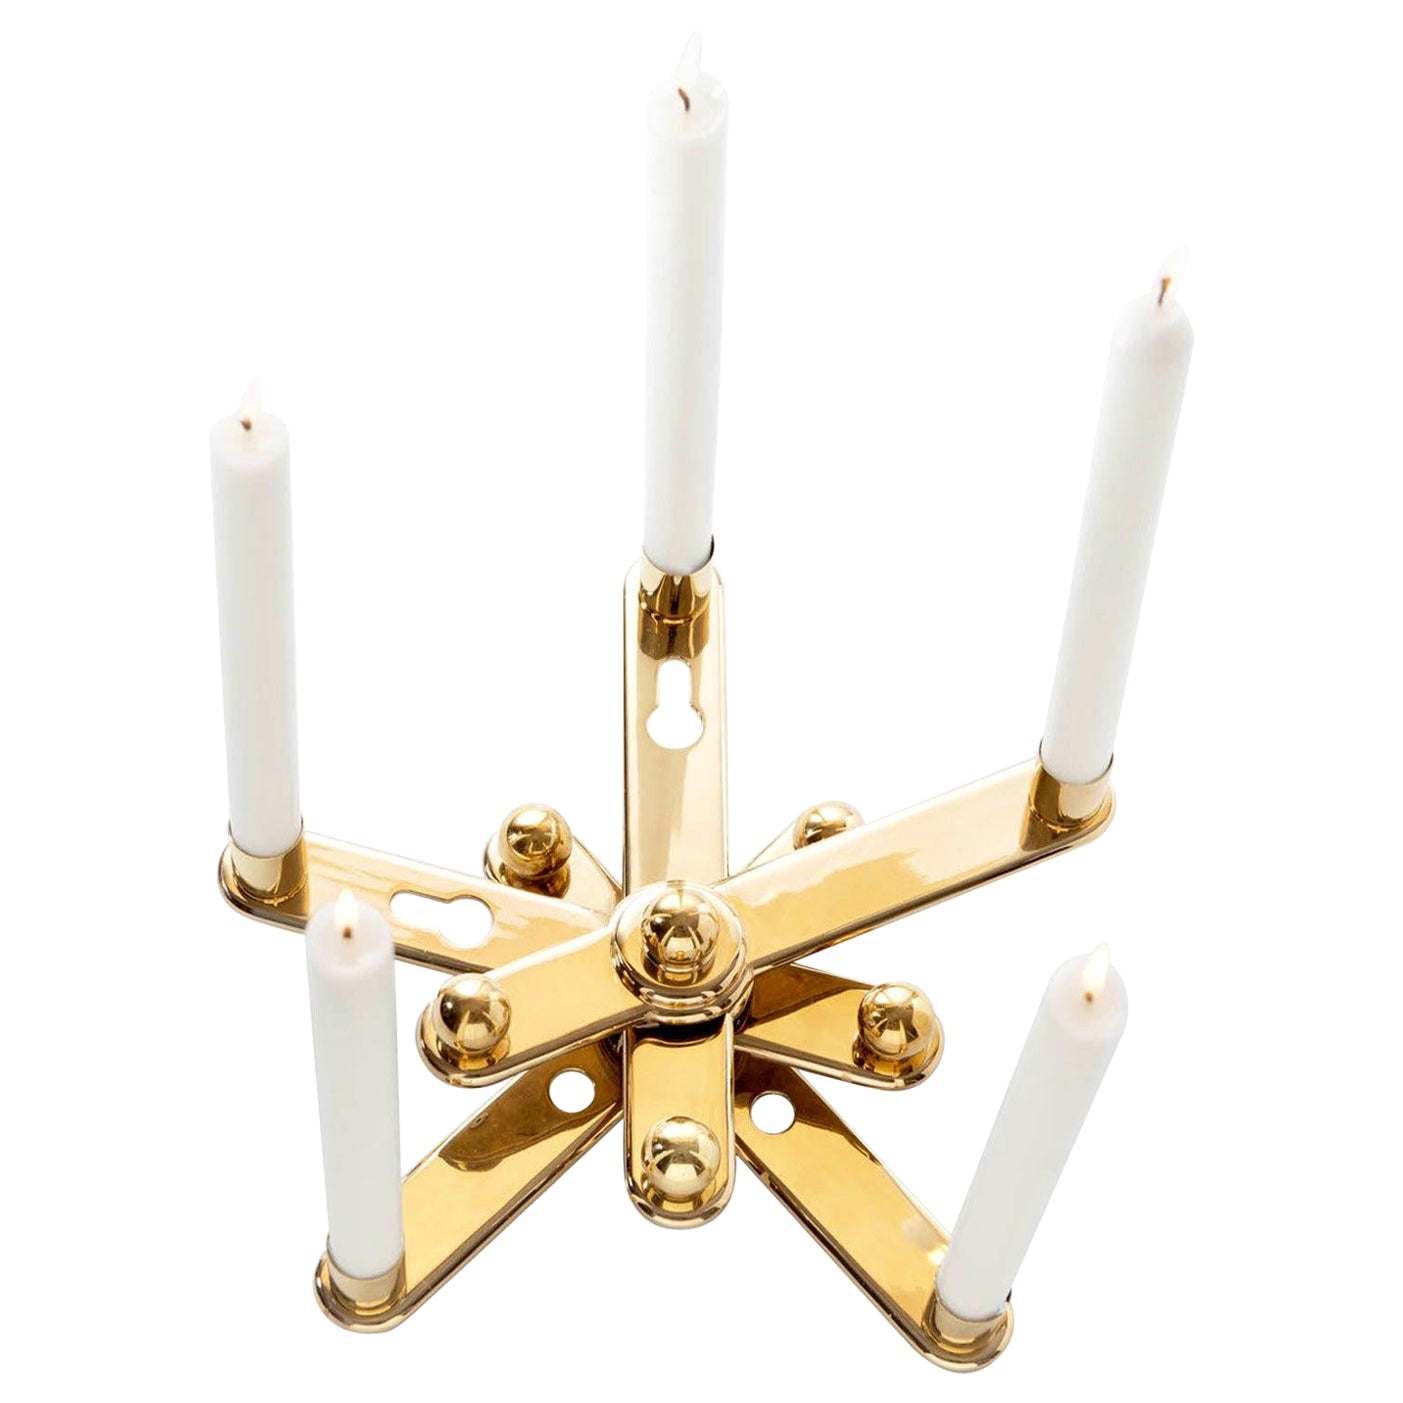 Curro Claret Contemporary Candleholder Brass Limited Edition For Sale